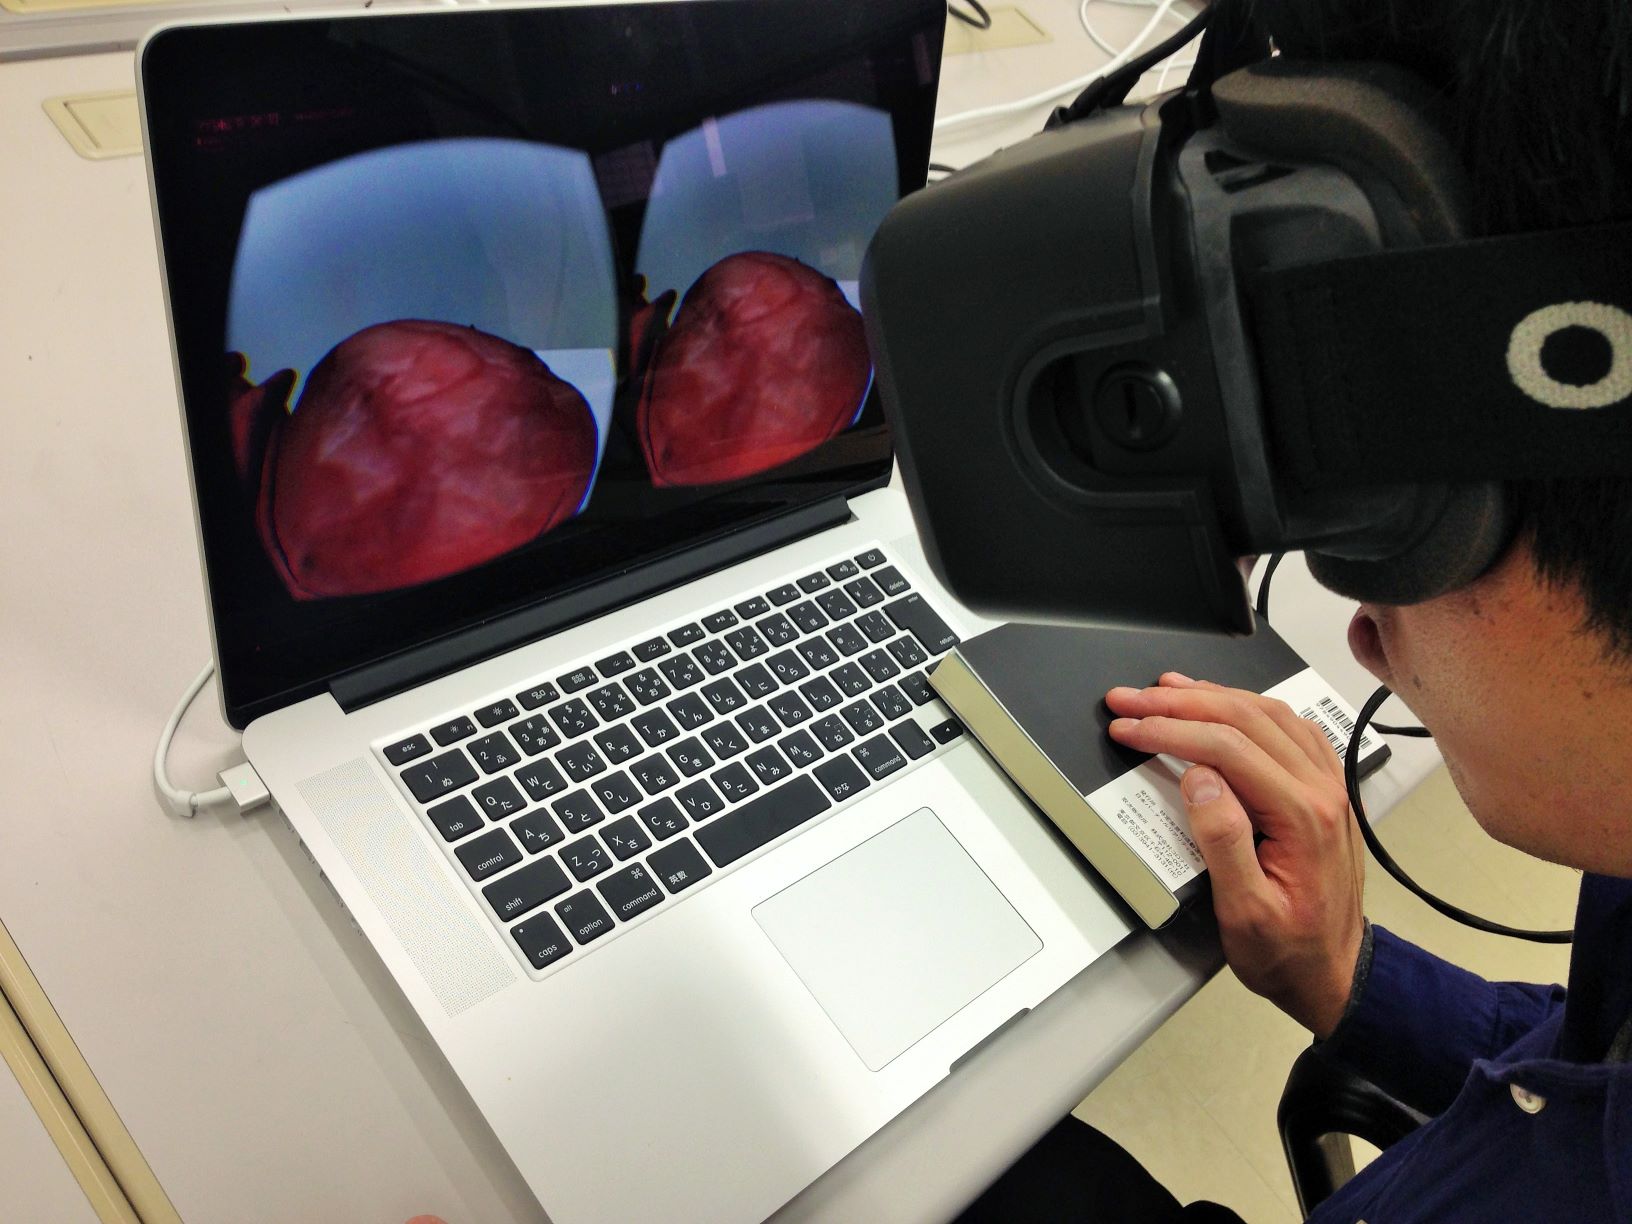 Using Virtual Reality to Observe the Heart